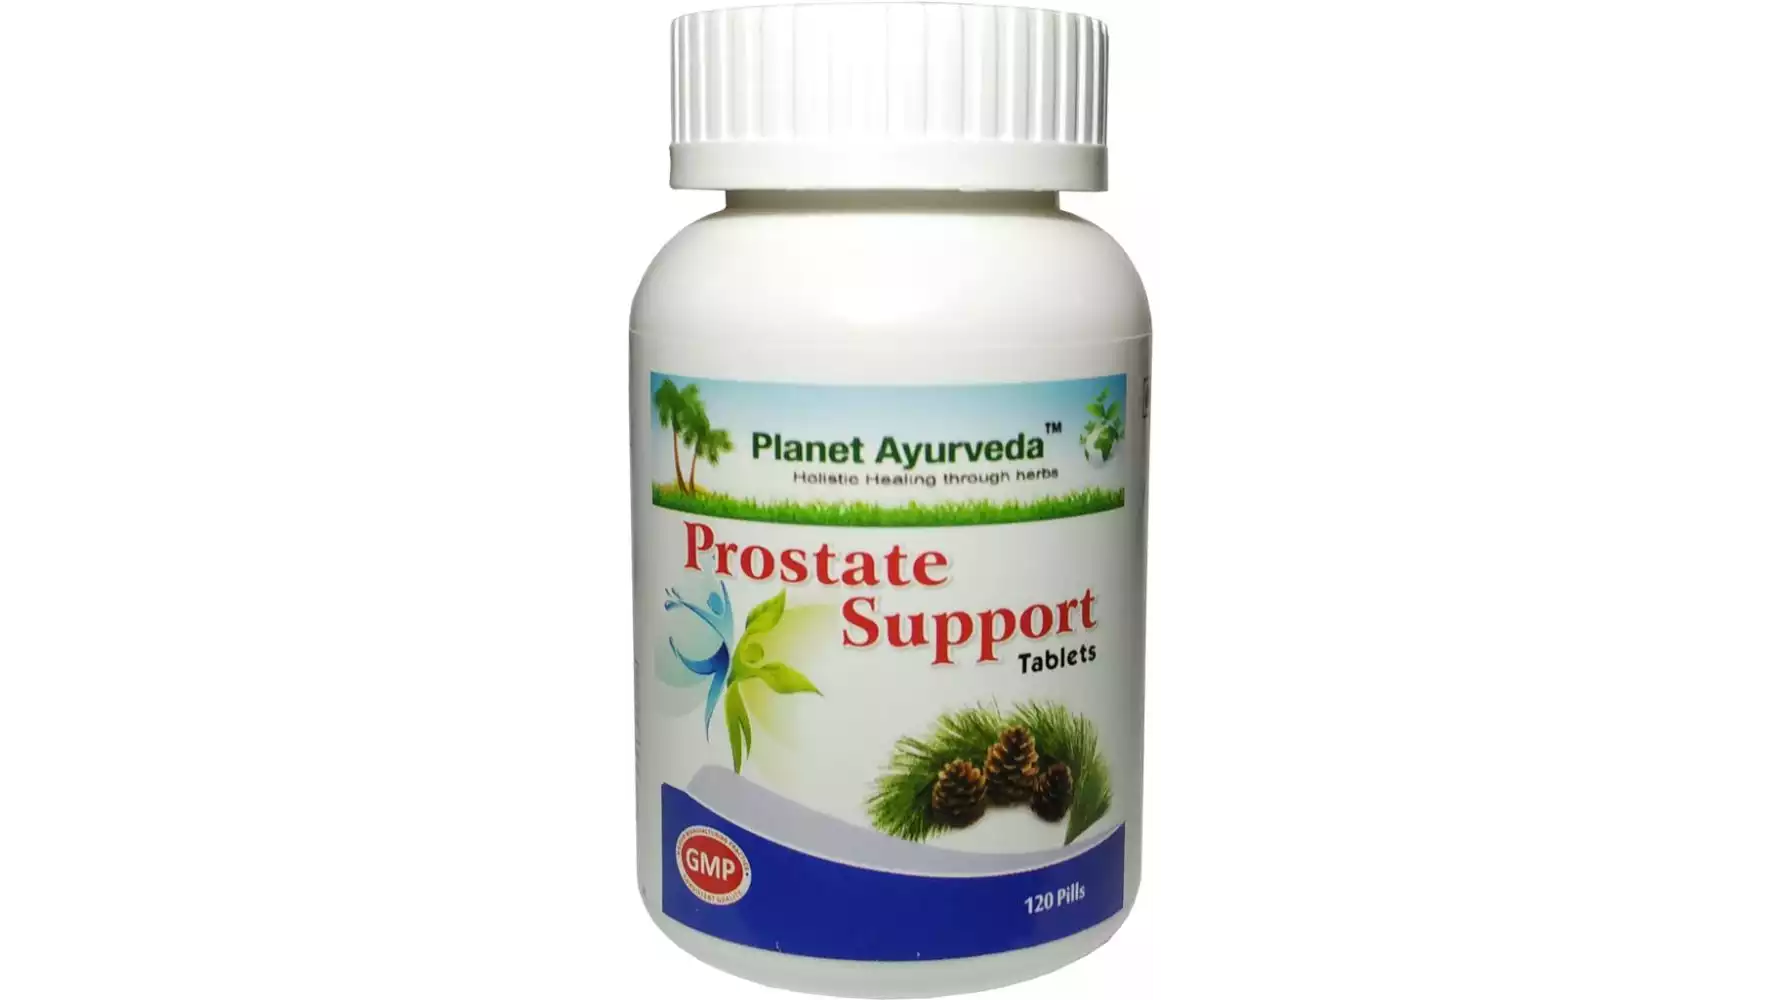 Planet Ayurveda Prostate Support Tablets (120tab, Pack of 2)